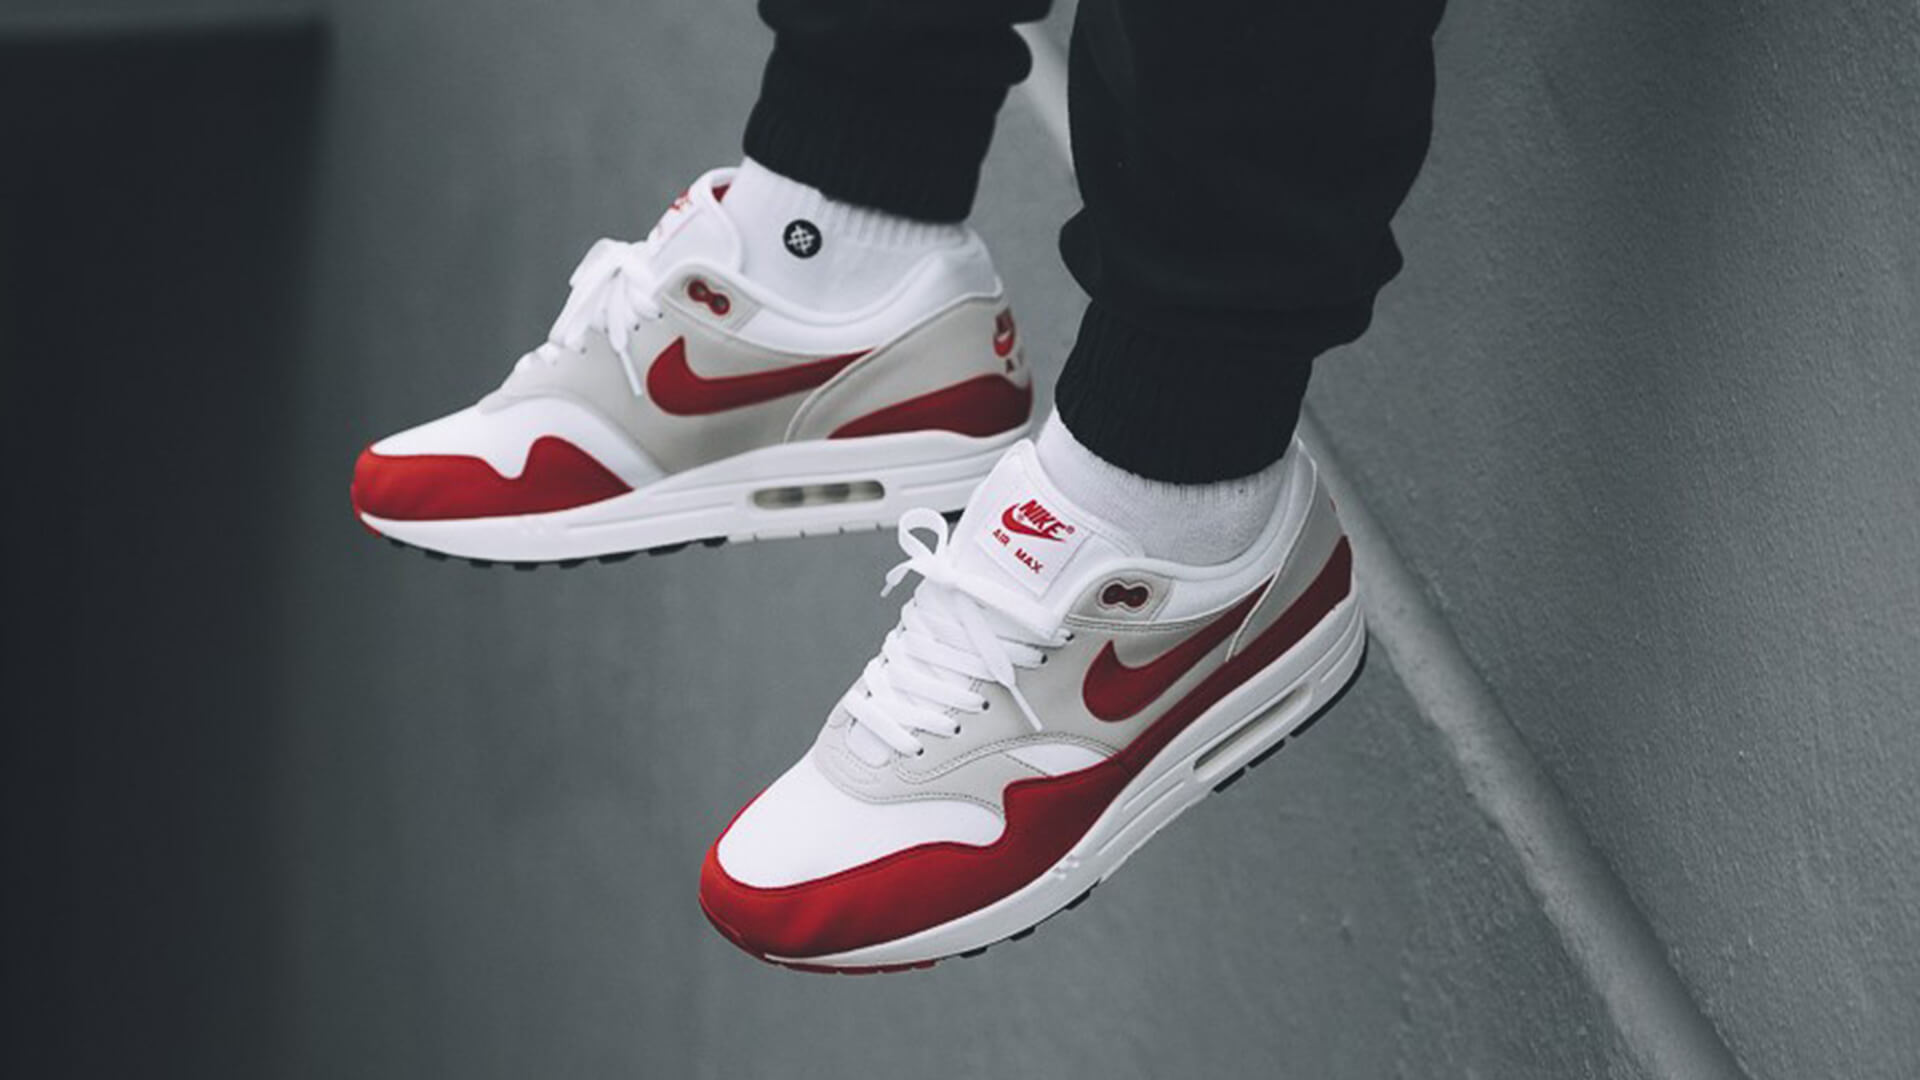 nike air max 1 release dates 2019|57 